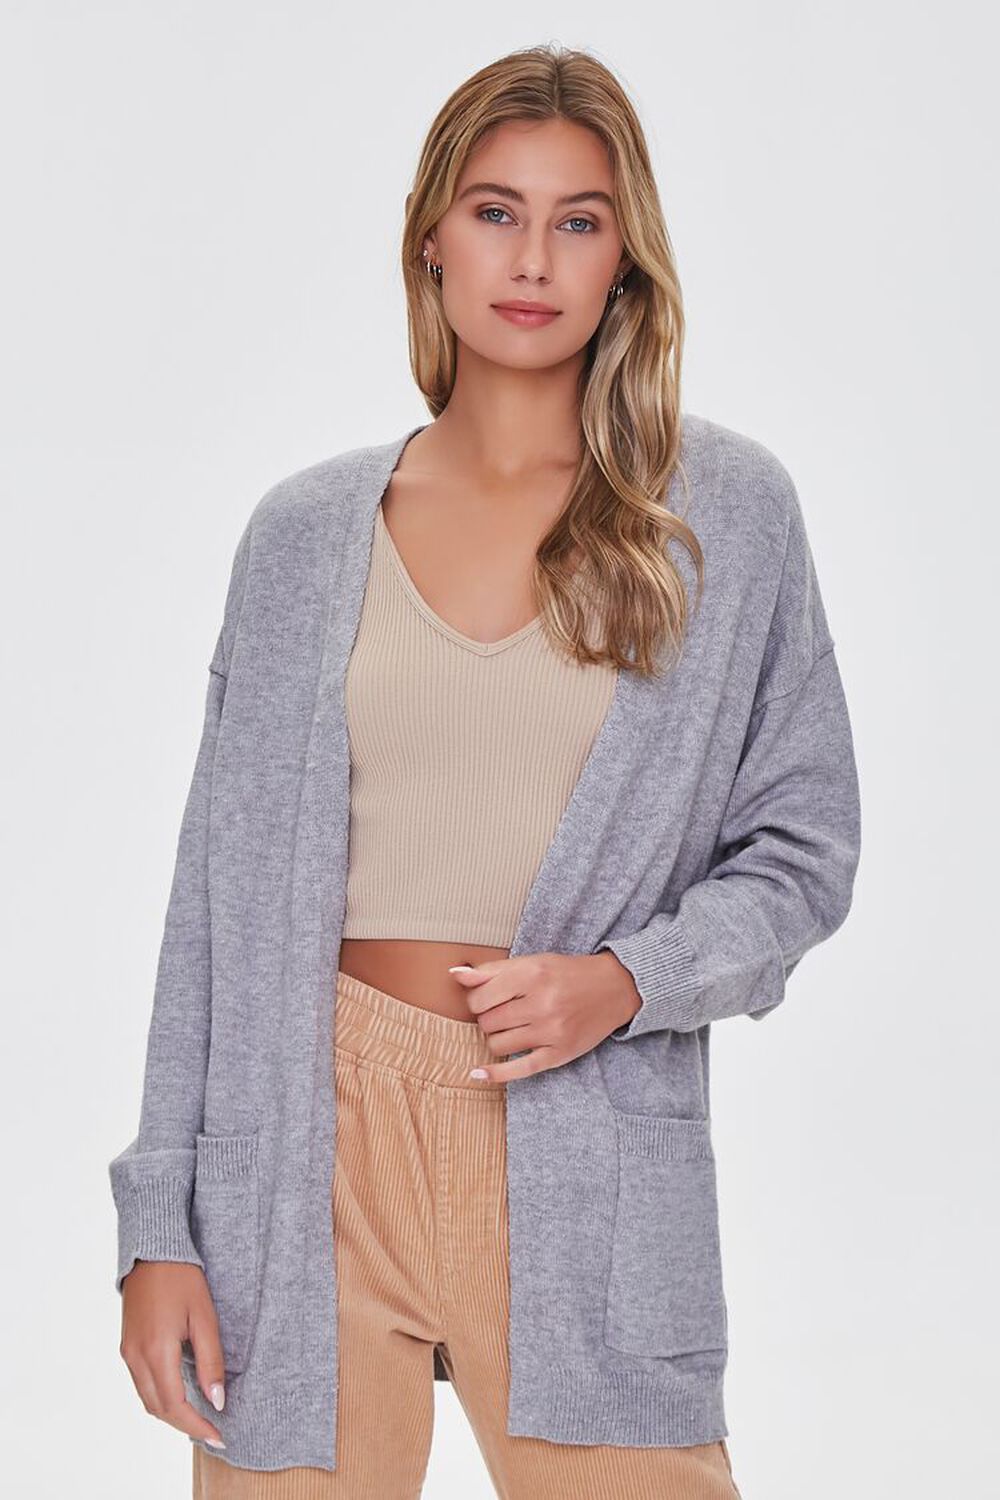 HEATHER GREY Open-Front Cardigan Sweater, image 1